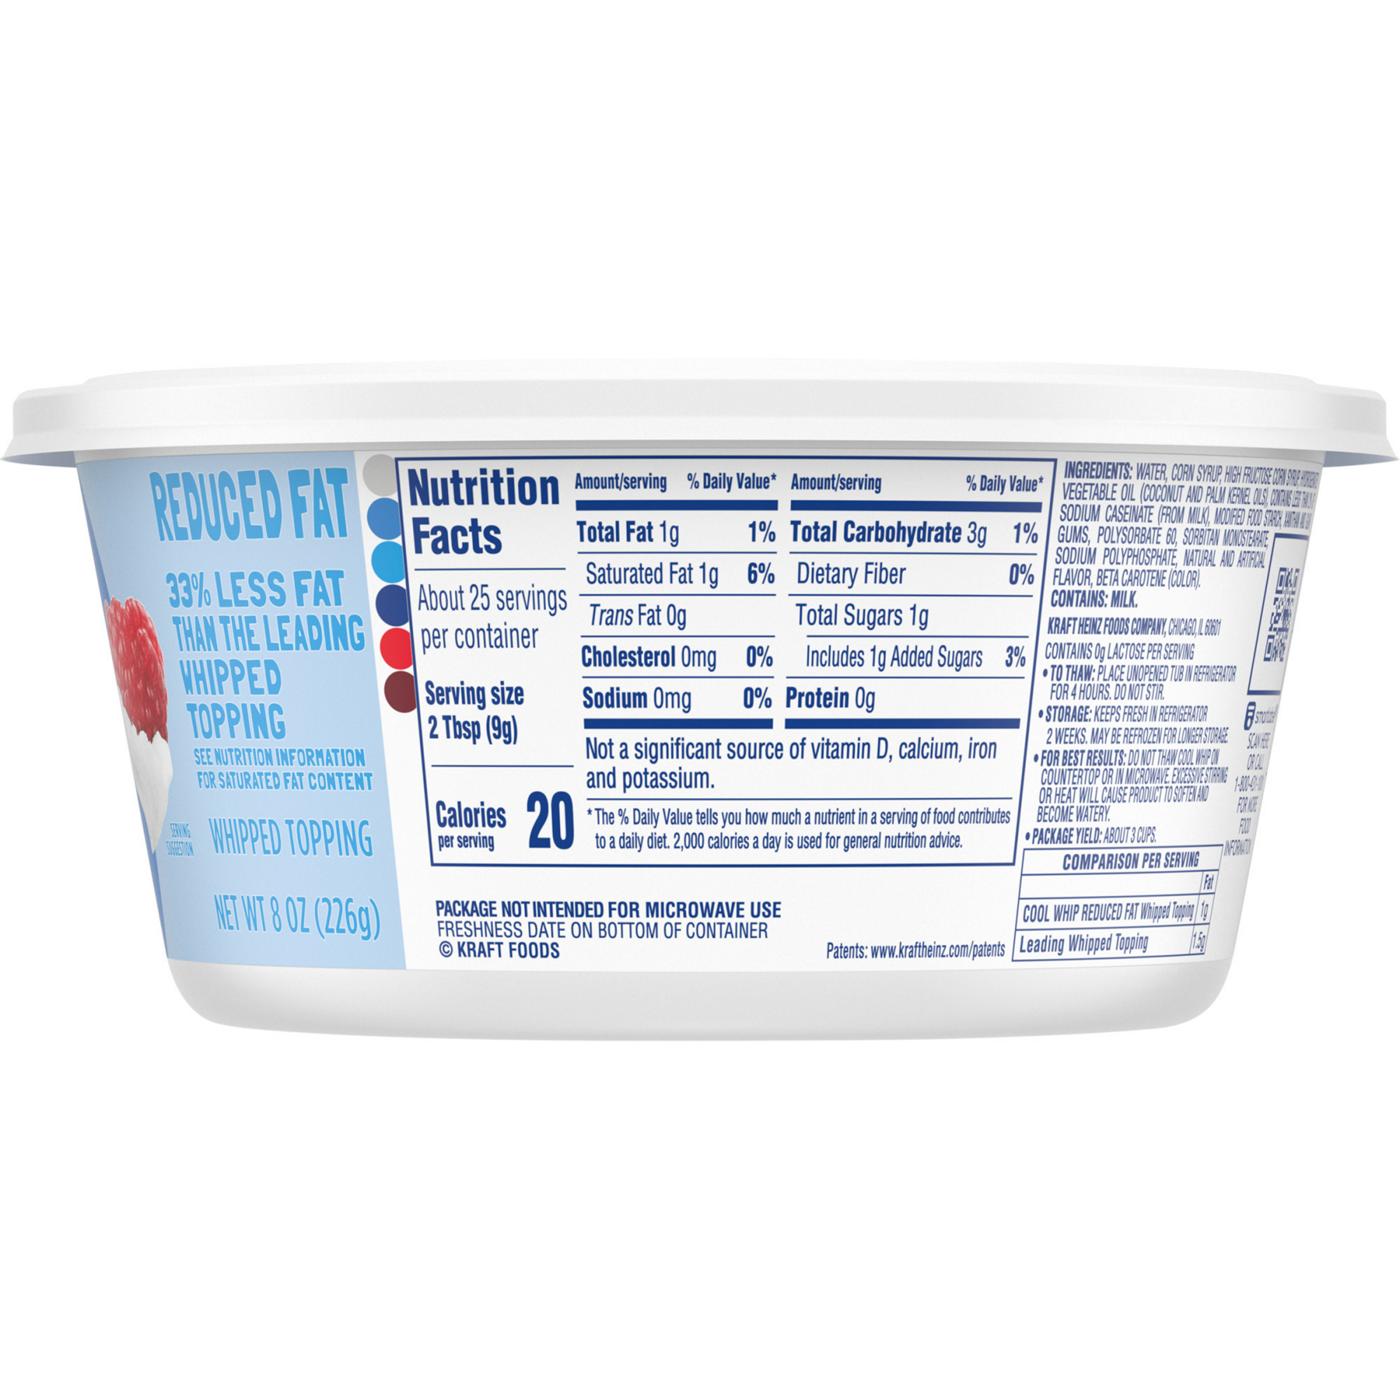 Kraft Cool Whip Reduced Fat Whipped Topping; image 5 of 9